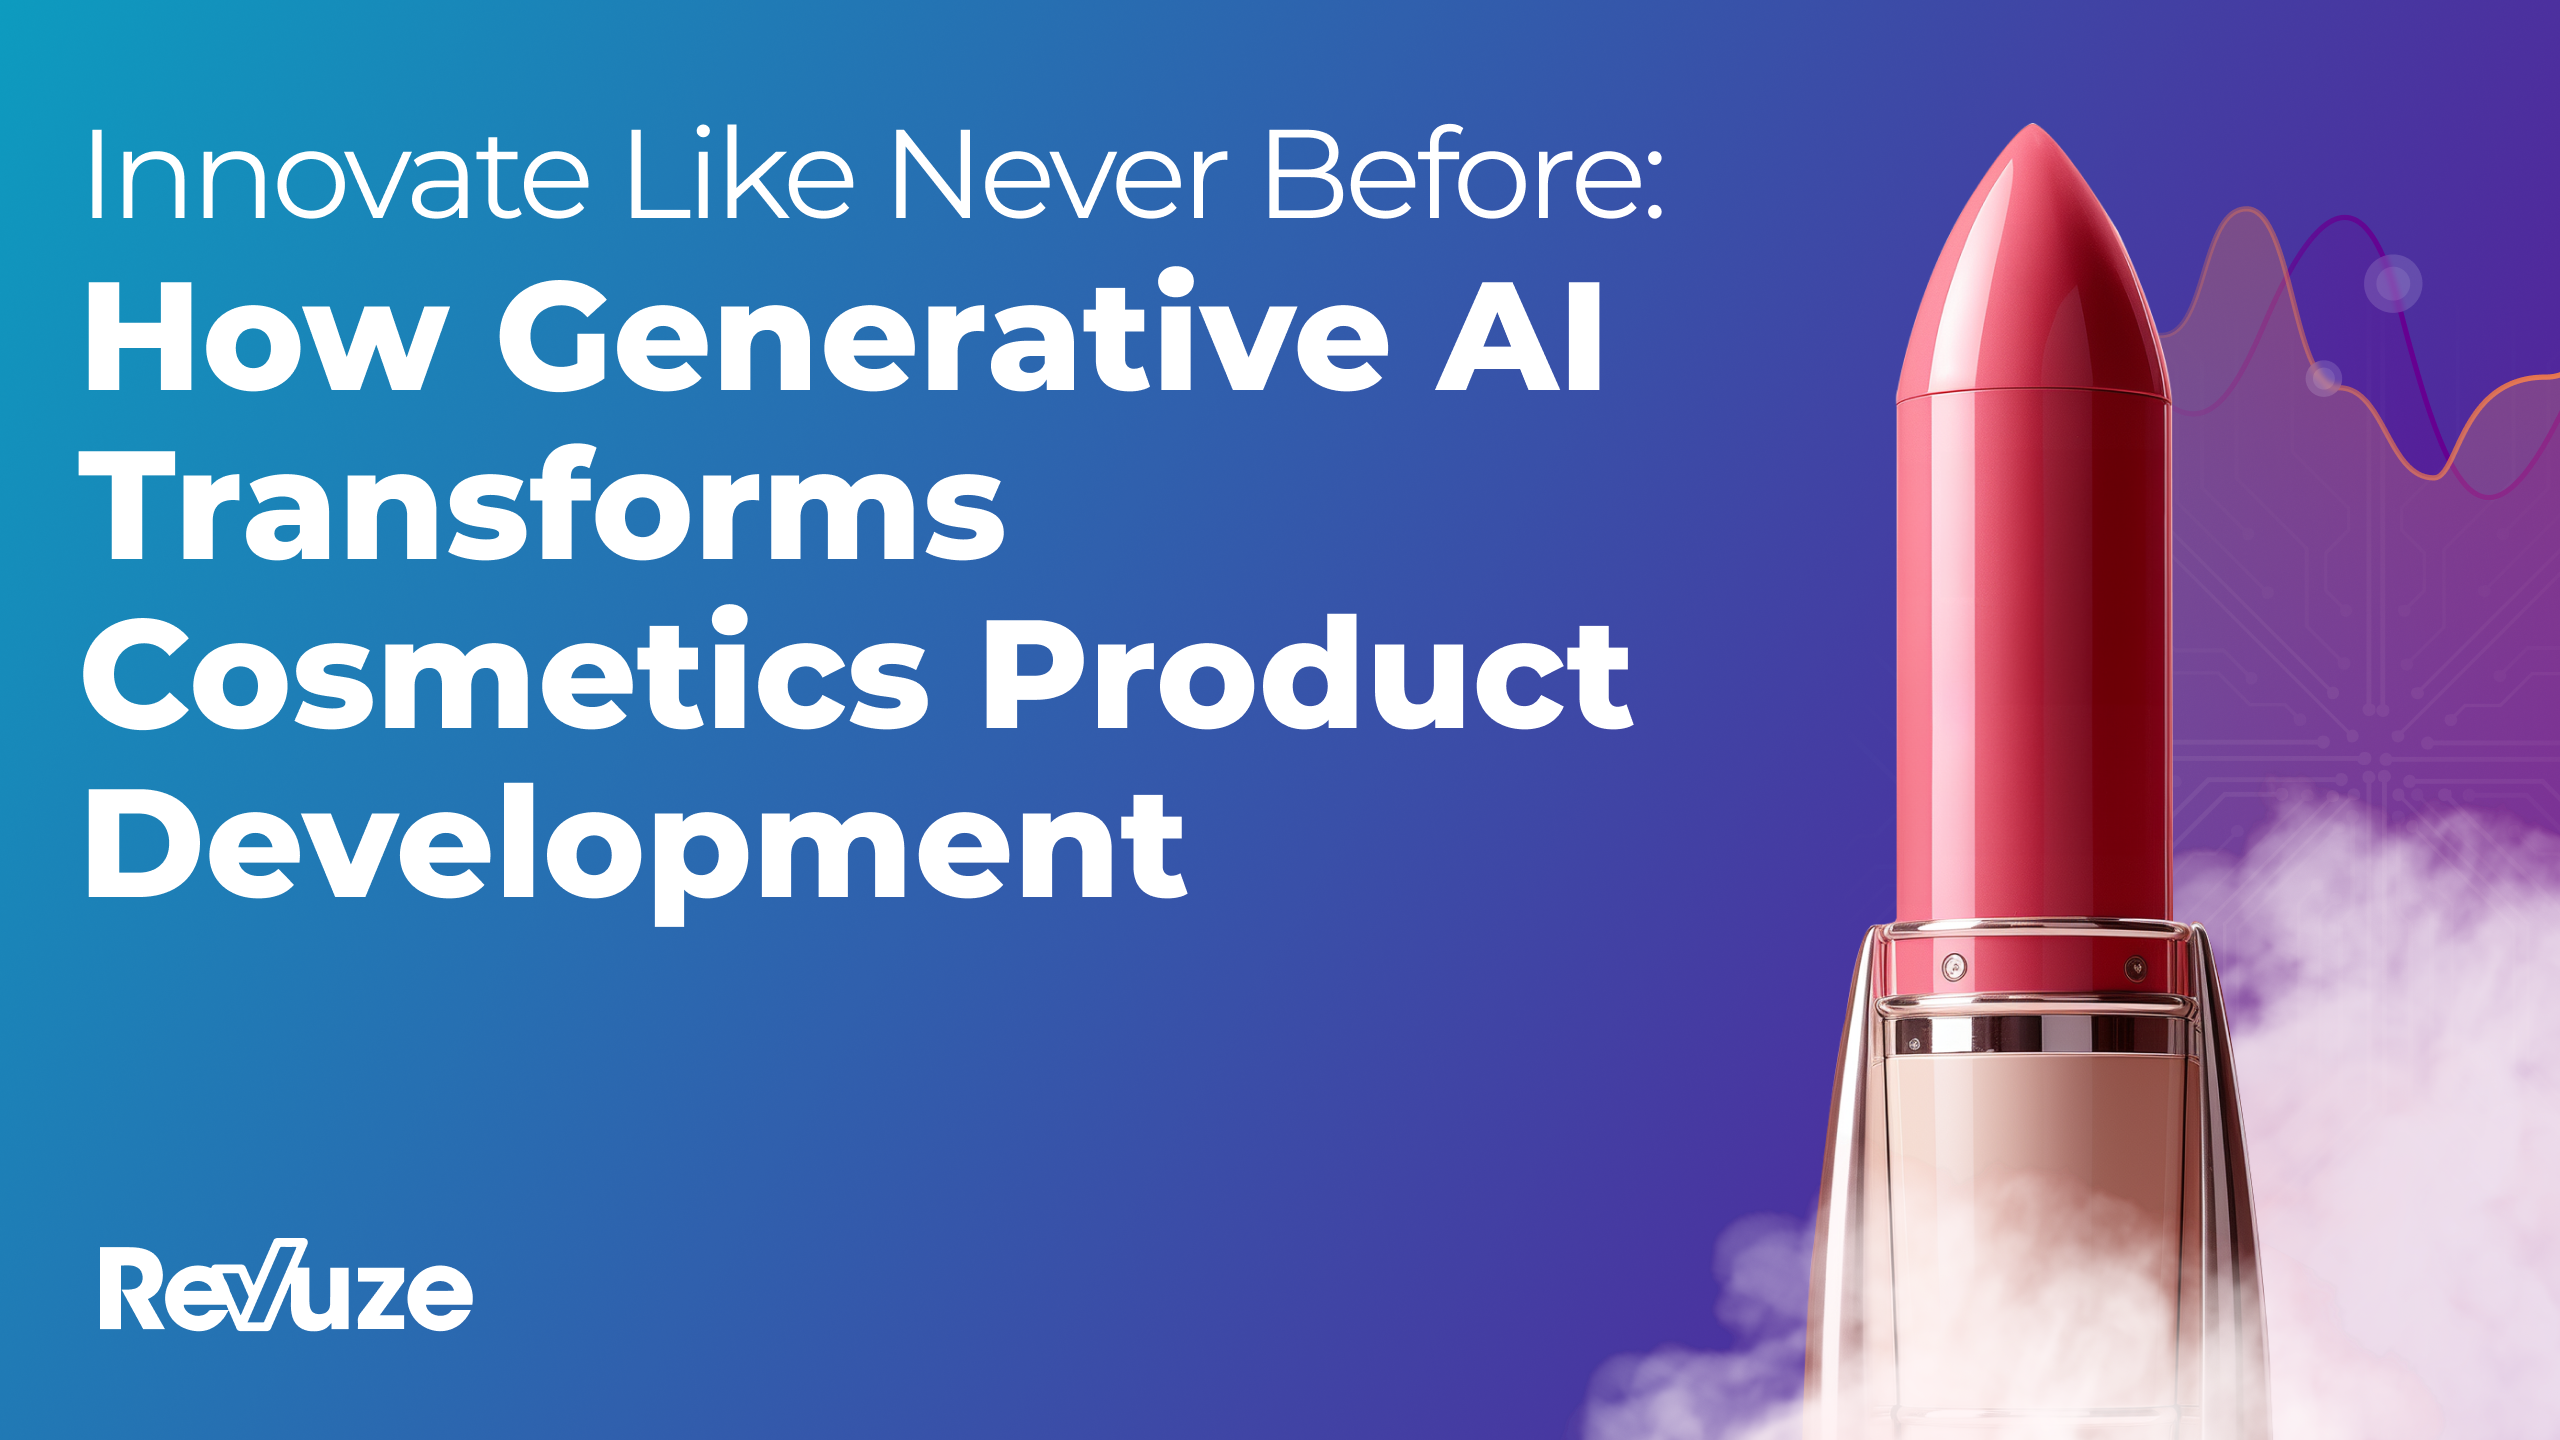 Innovate Like Never Before: How Generative AI Transforms Cosmetics Product Development